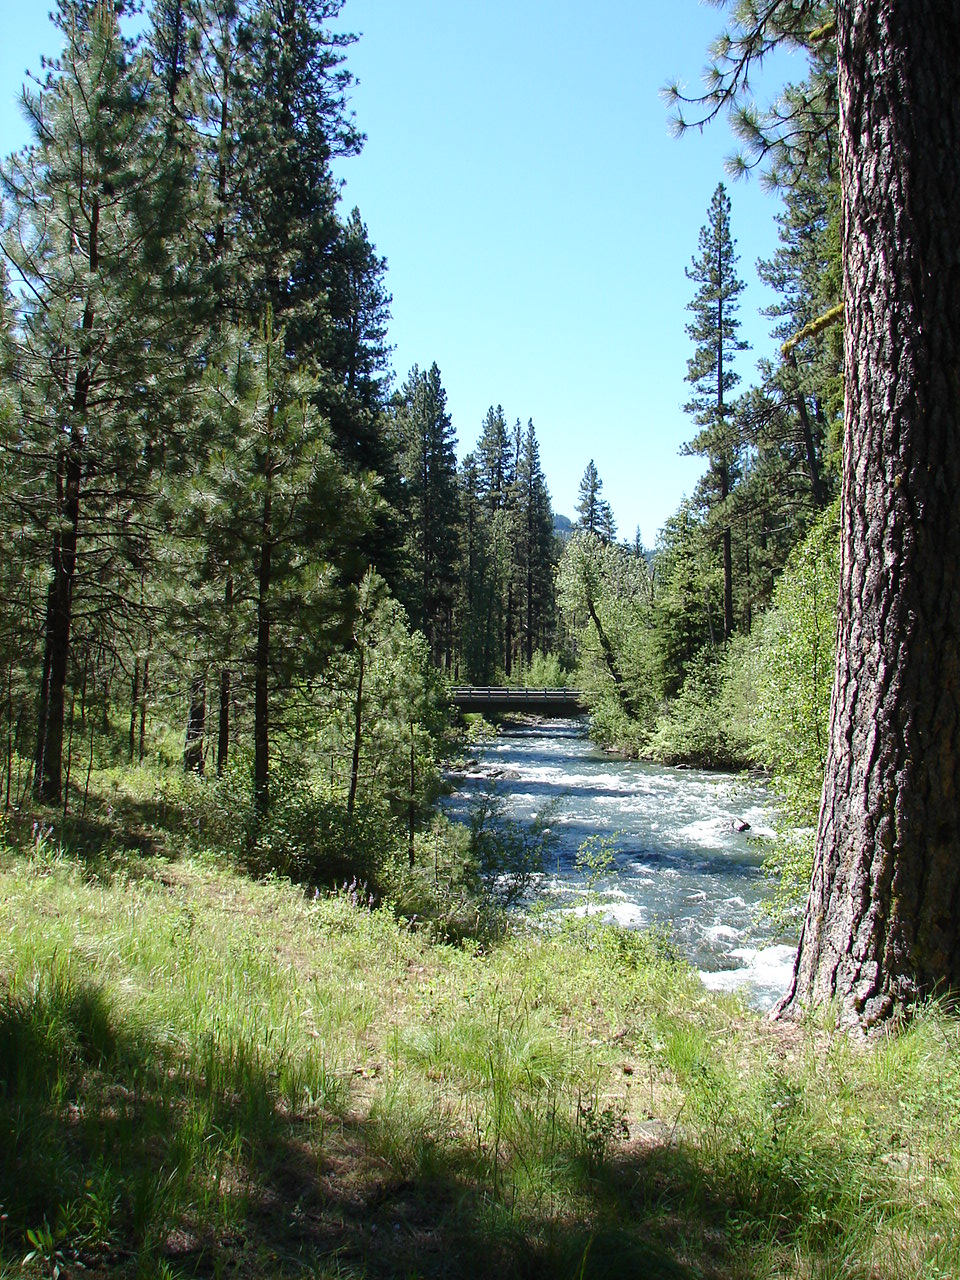 Wild and scenic Imnaha River flowing through a pine and fir tree forest